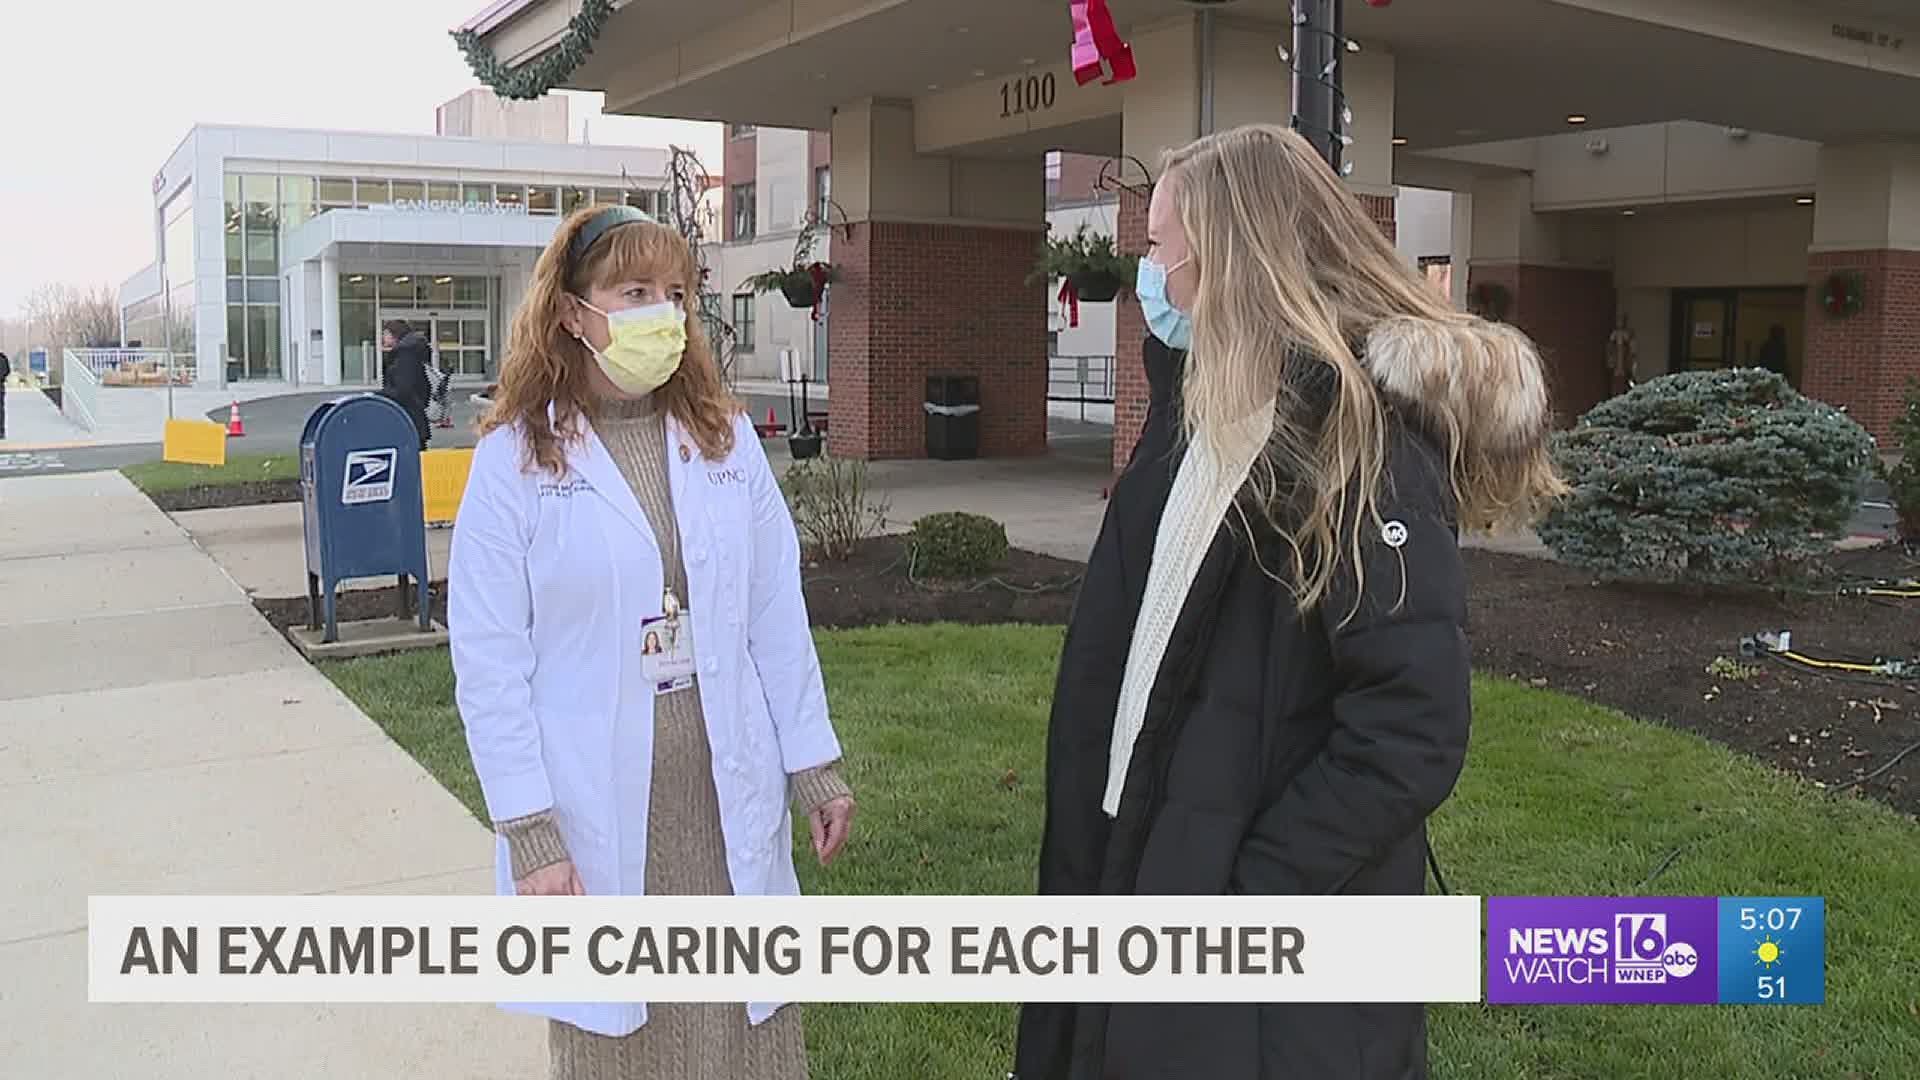 Samantha Branton, a college student from Lycoming County is making a social sacrifice so her mom can keep working at the hospital.